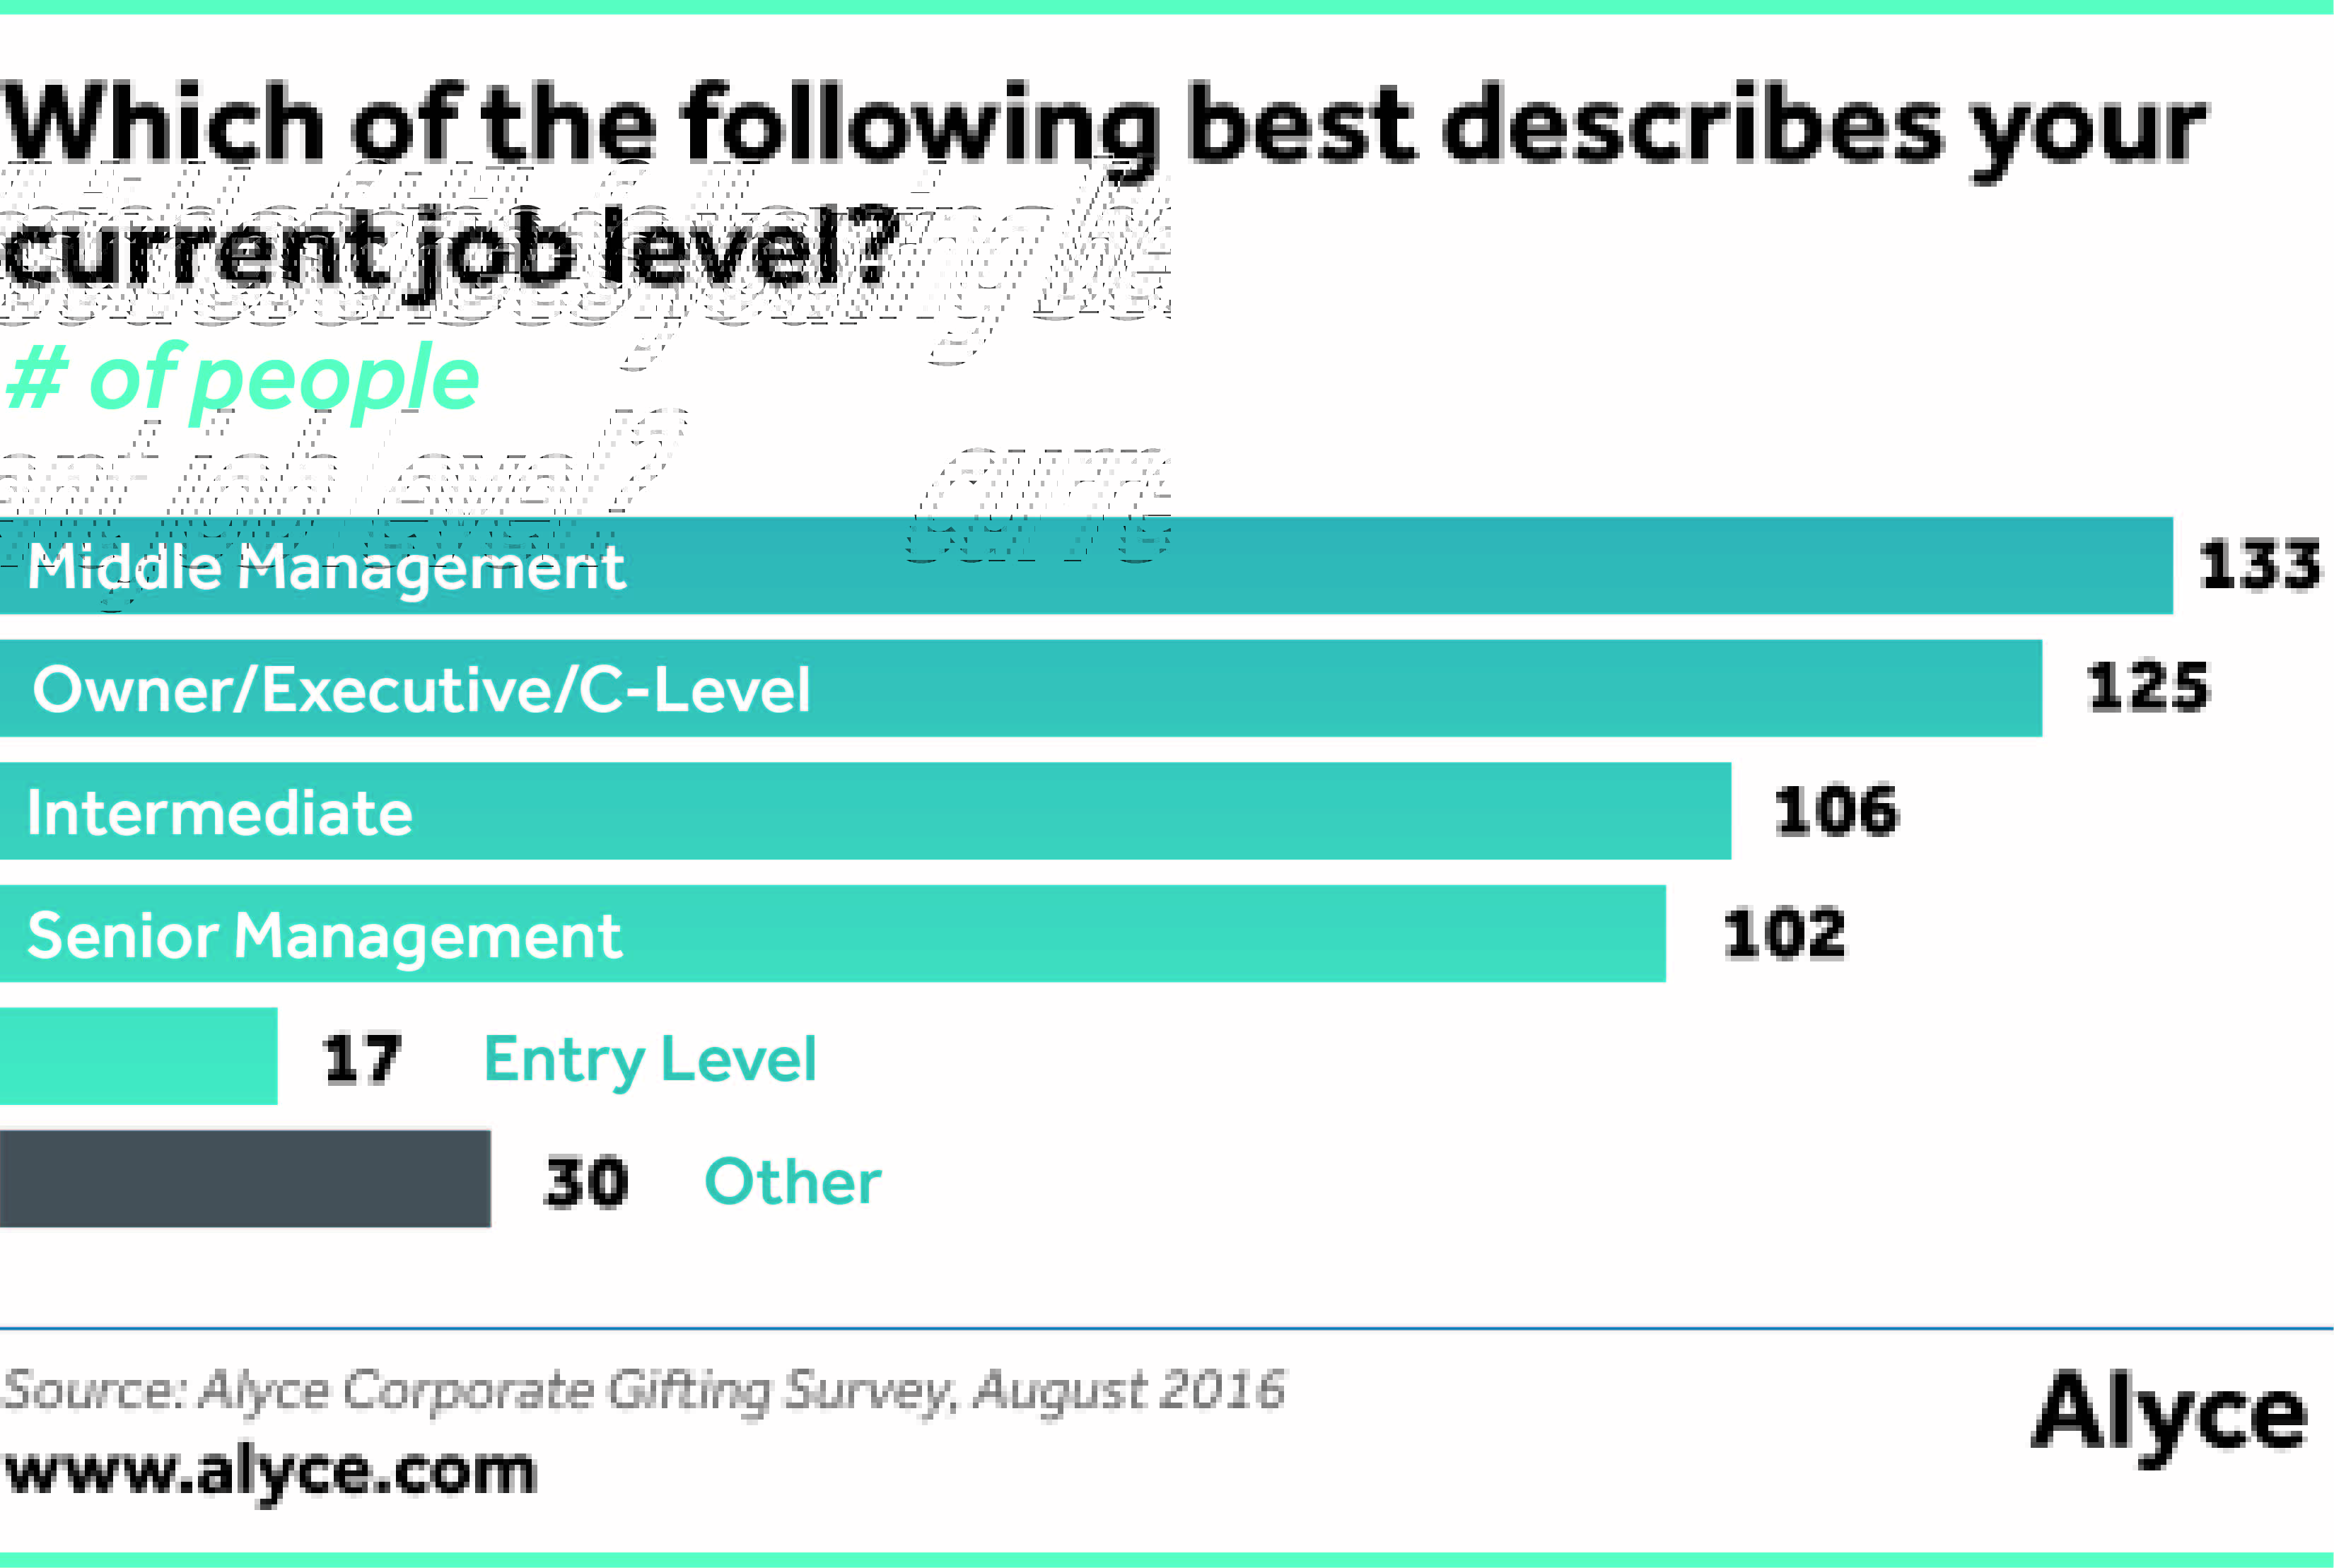 Which of the following best describes your current job level?